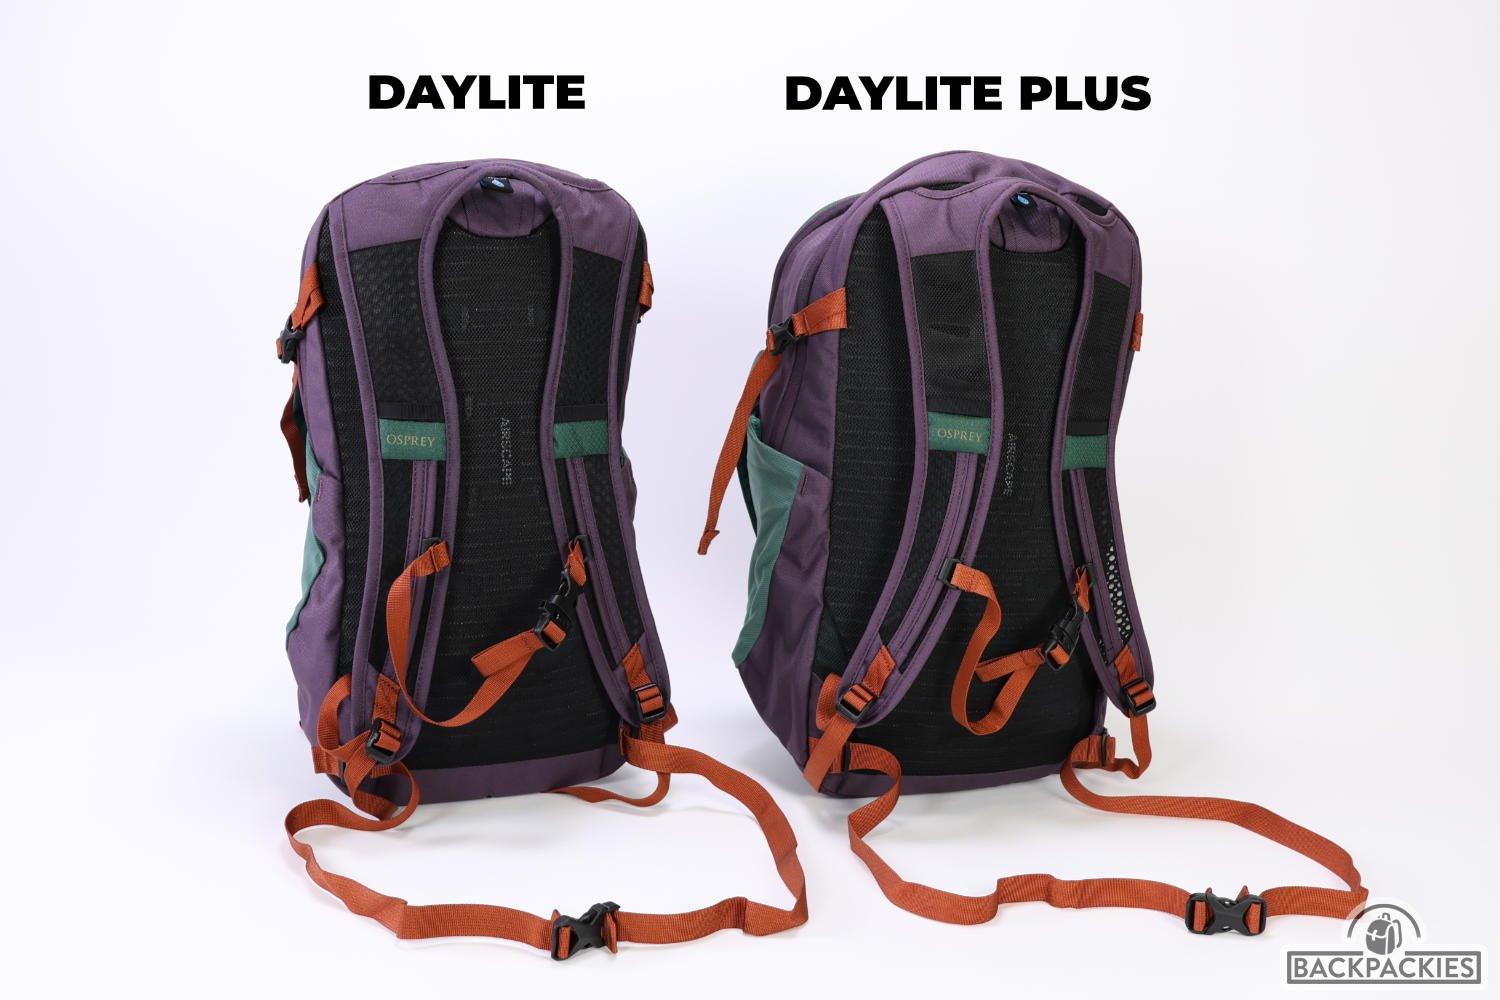 Osprey Daylite Plus Backpack Review 